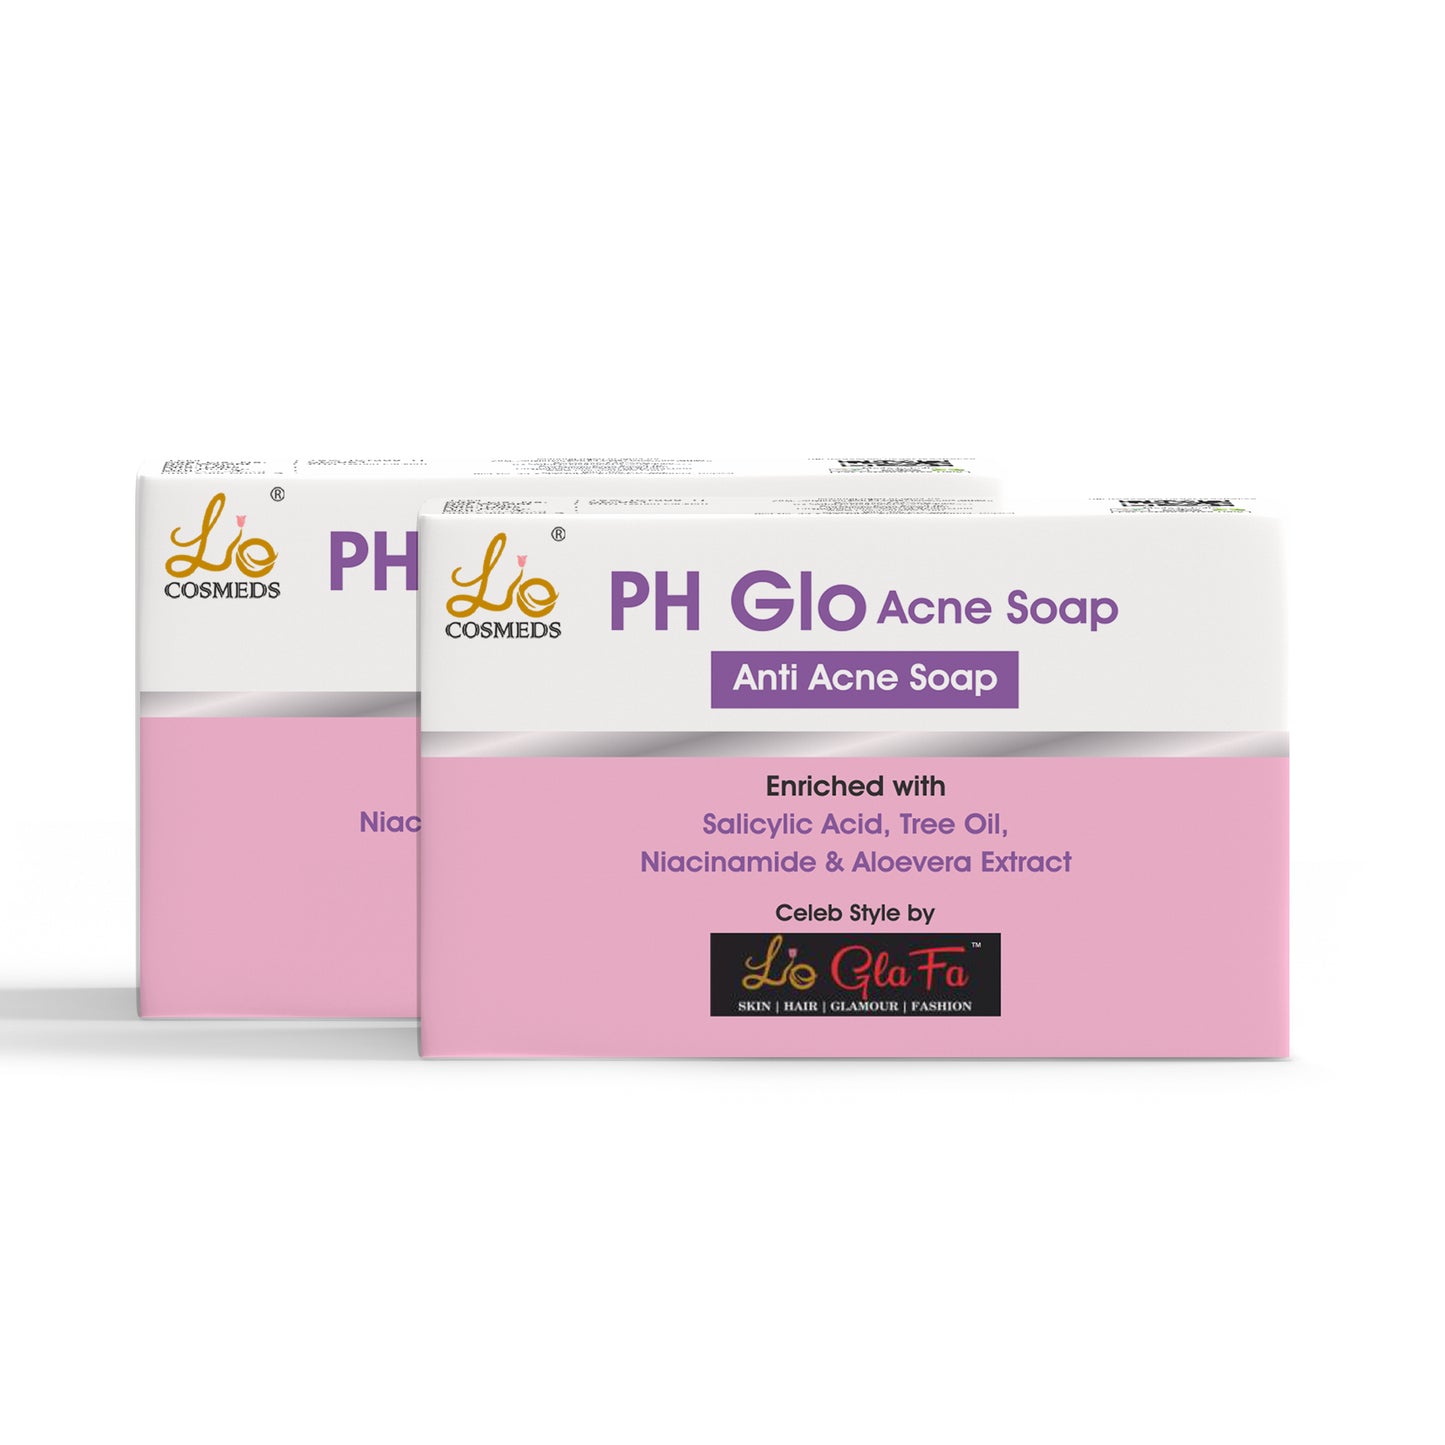 PHGLO Anti Acne Soap (Pack of 2)